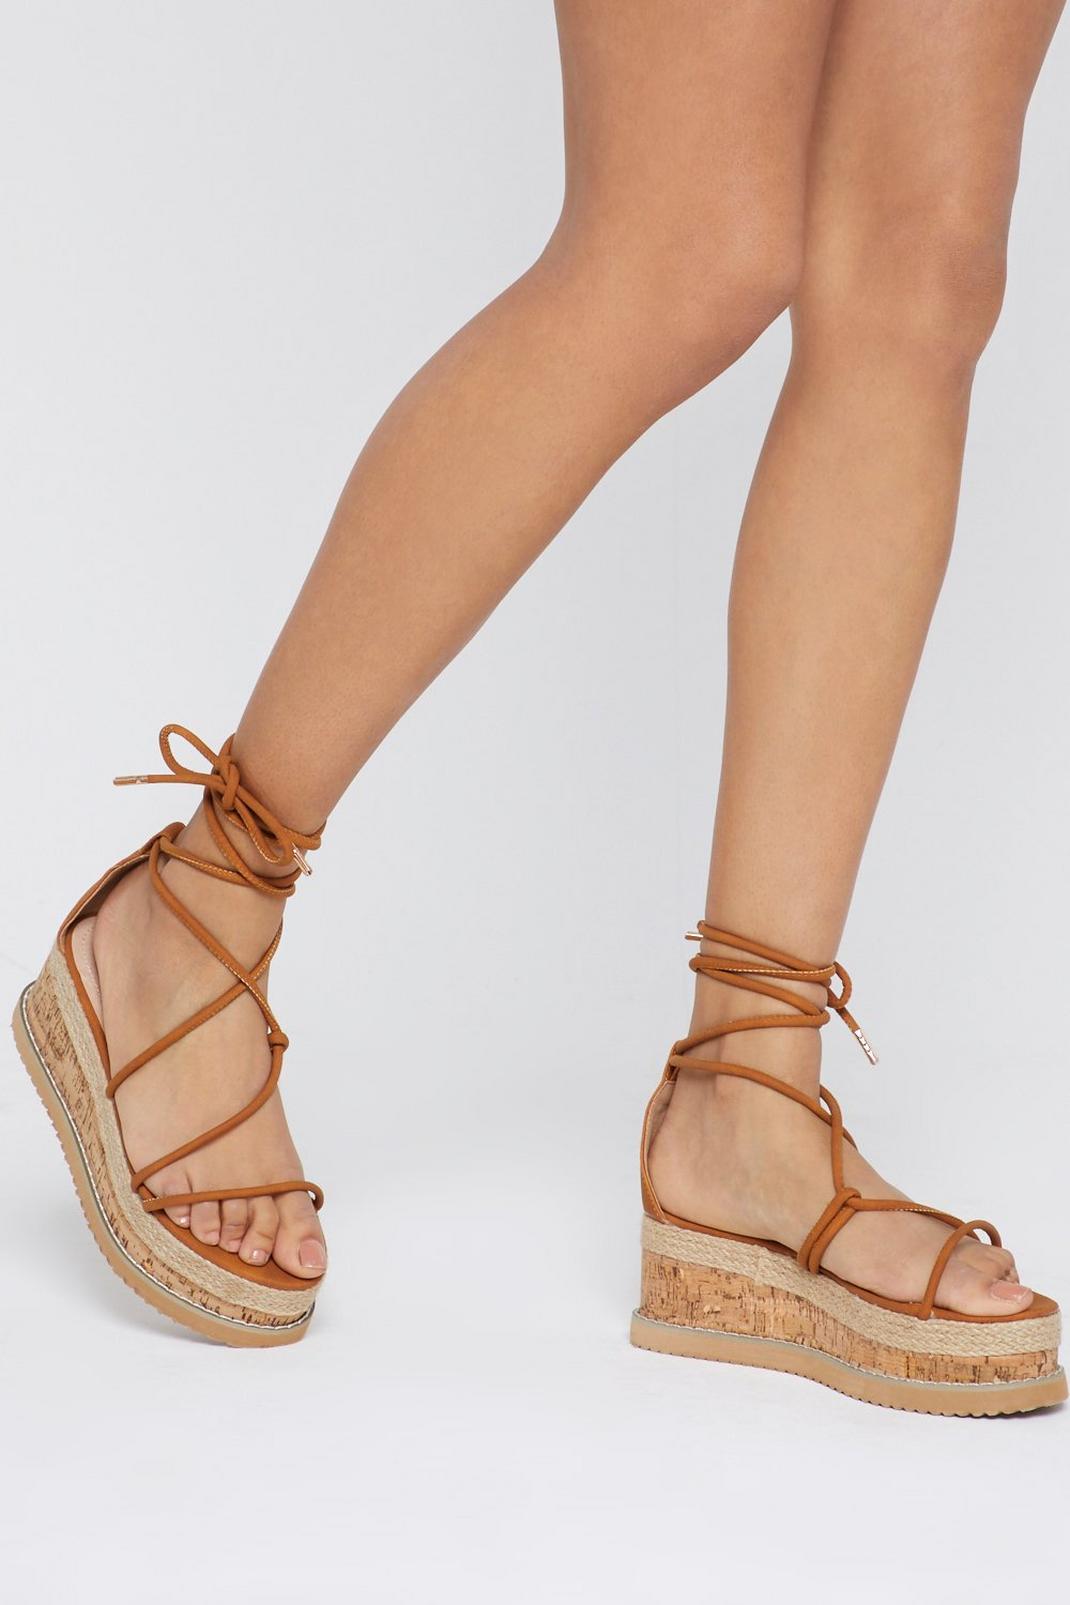 Give It a Go Wrap Cork Sandals image number 1